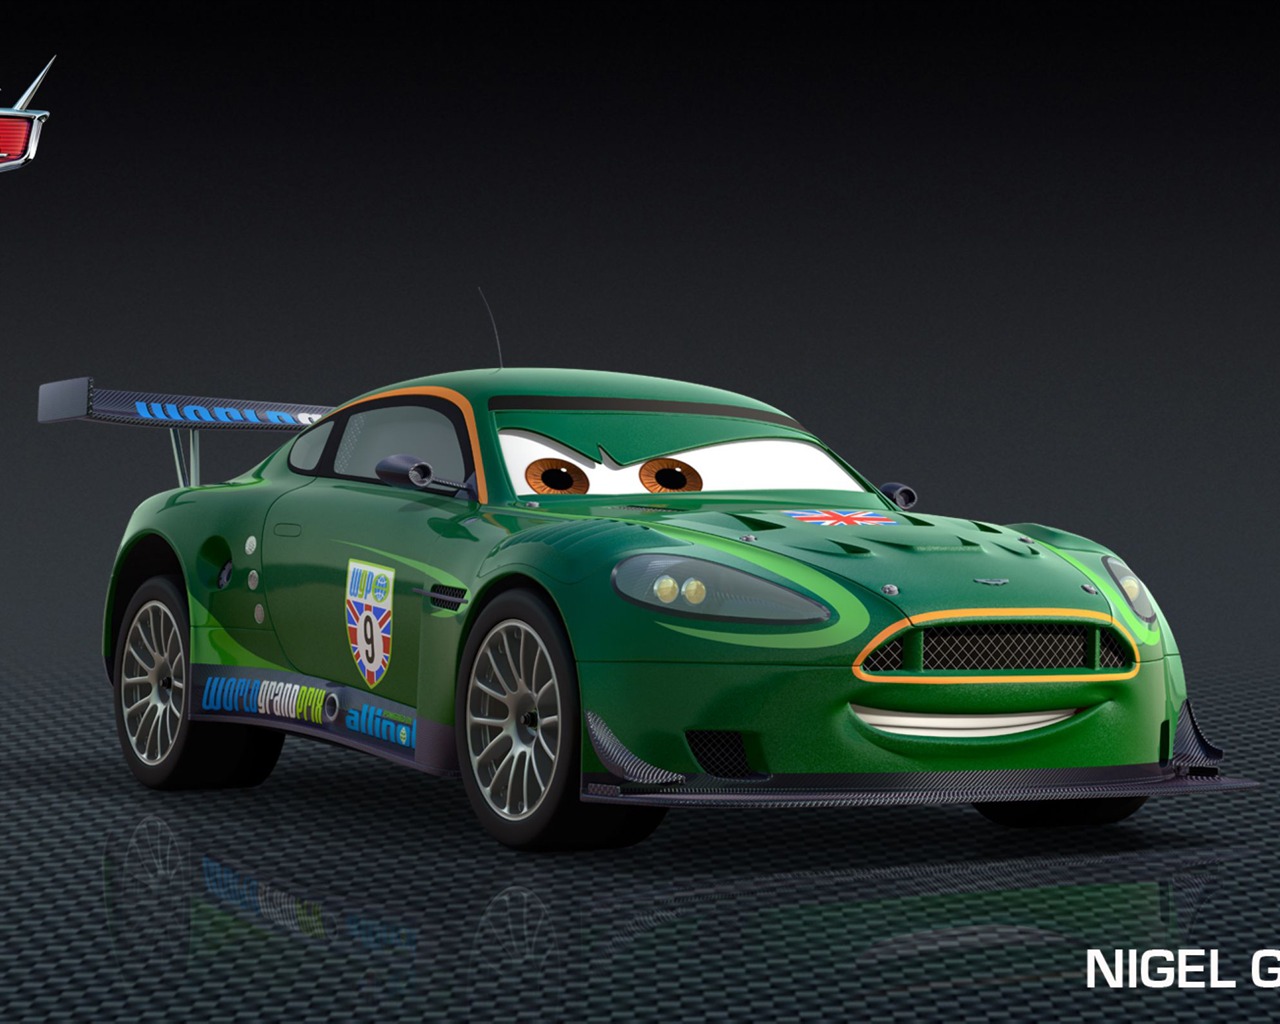 Cars 2 wallpapers #29 - 1280x1024